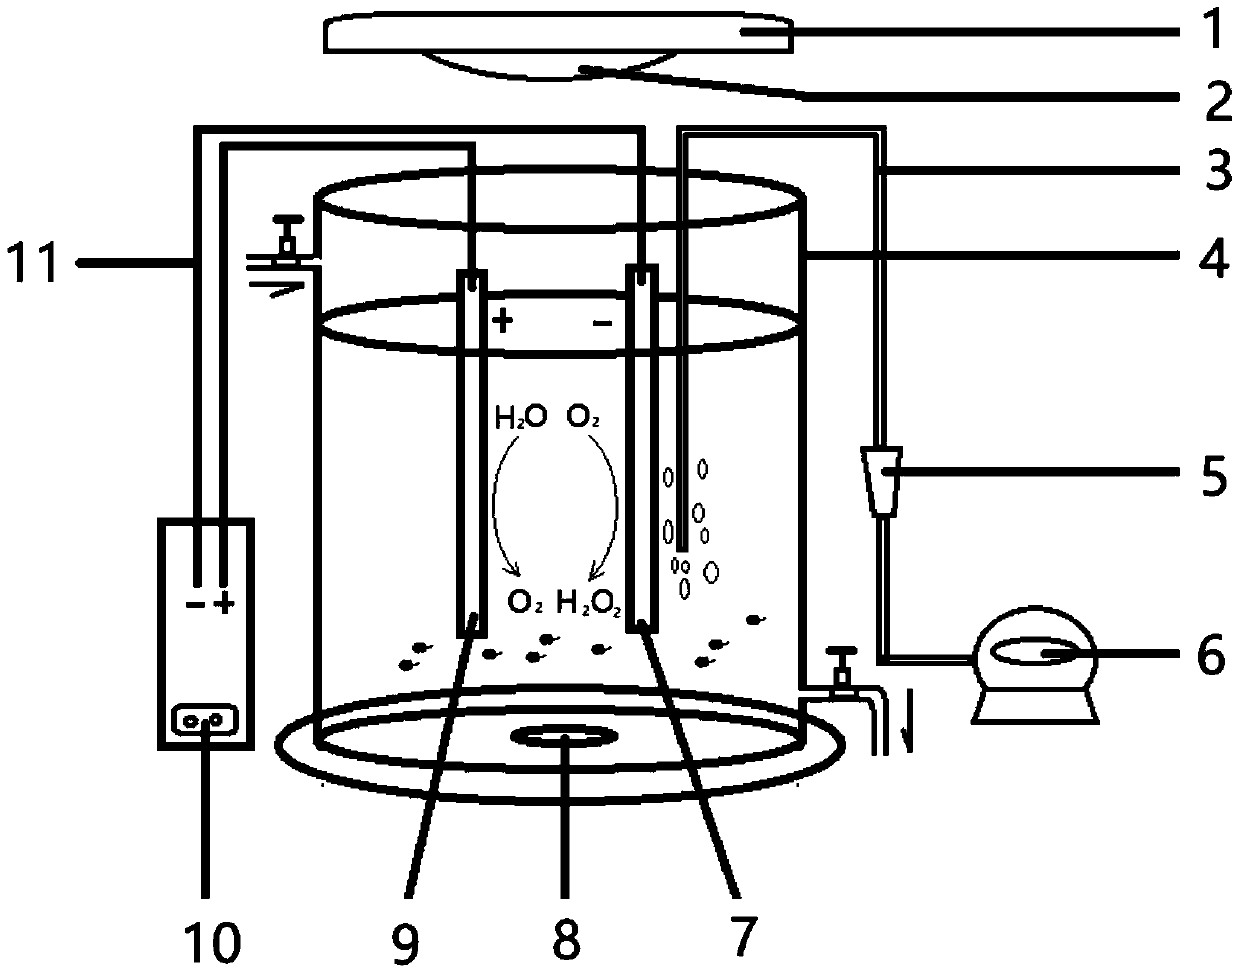 Method for inactivating microorganisms in drinking water based on photoelectrochemical reactor